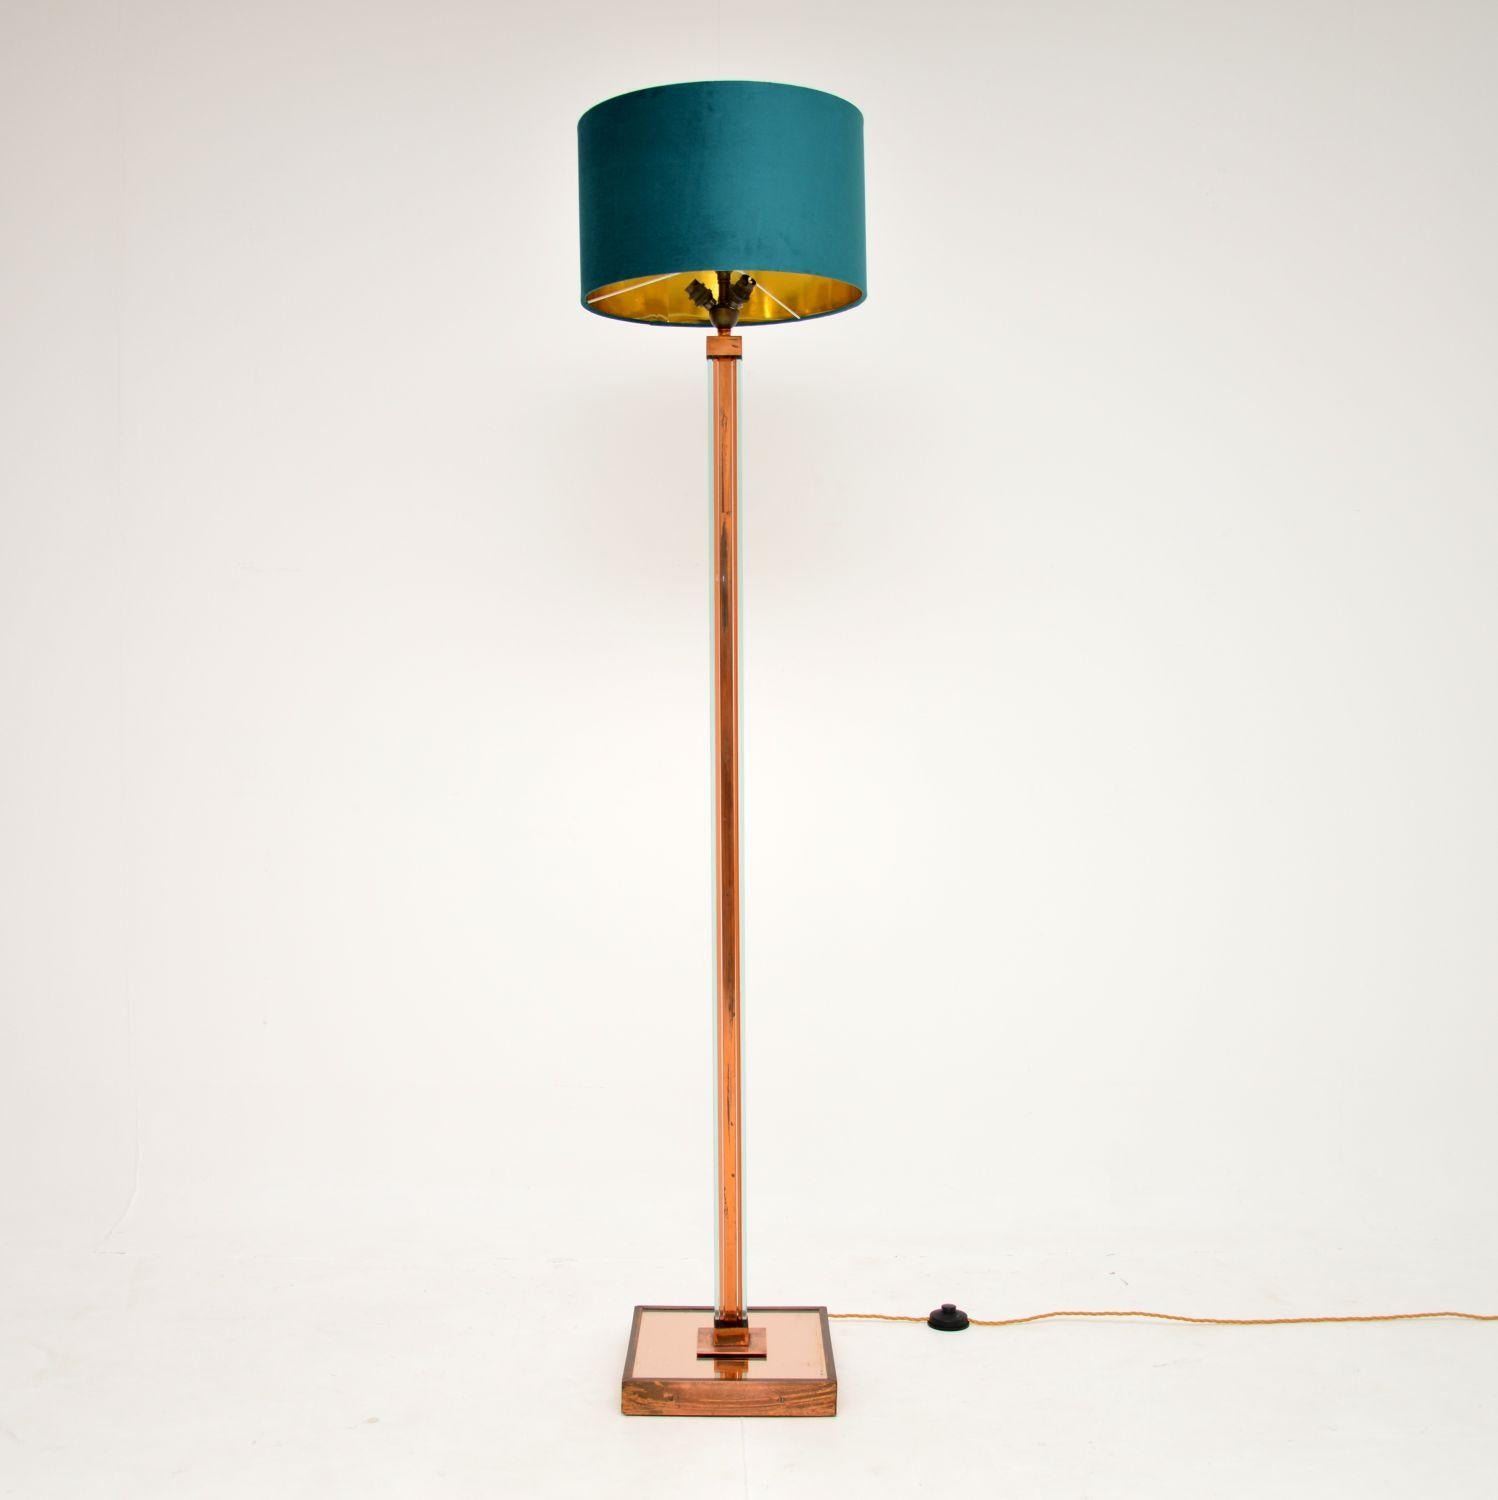 A beautiful original Art Deco floor lamp in copper, peach glass and acrylic. This was made in England, it dates from the 1930’s.

It has a stunning design and is of superb quality. The main copper frame is flanked by clear acrylic sheets, this sits